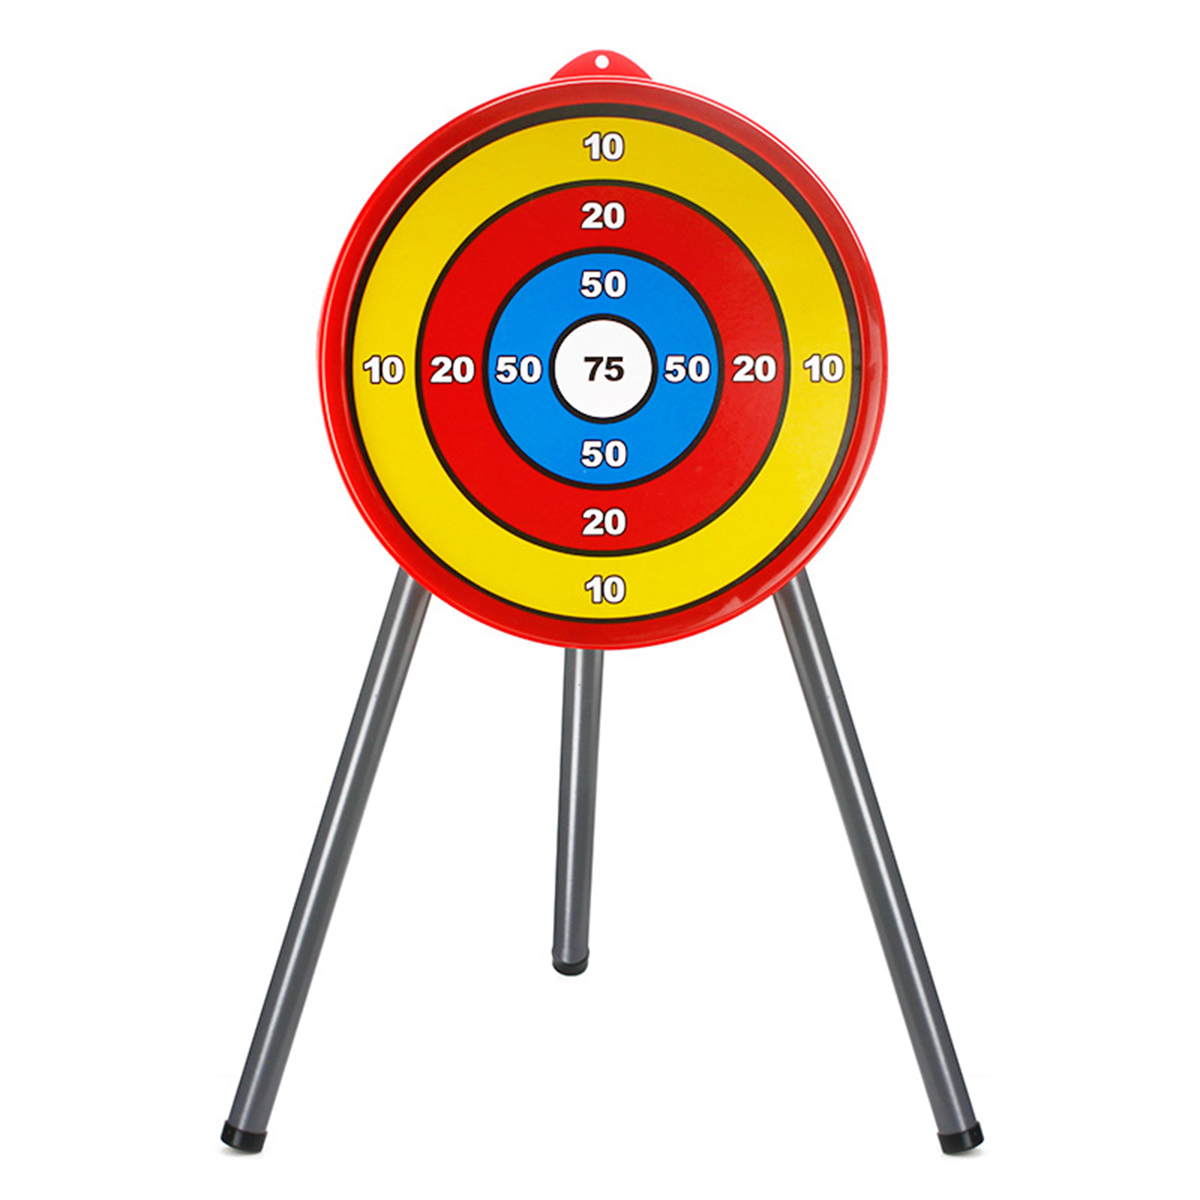 Classic-Archery-Shoot-Game-Set-Develop-Skill-Novelties-Toys-for-Young-Kids-1690766-5